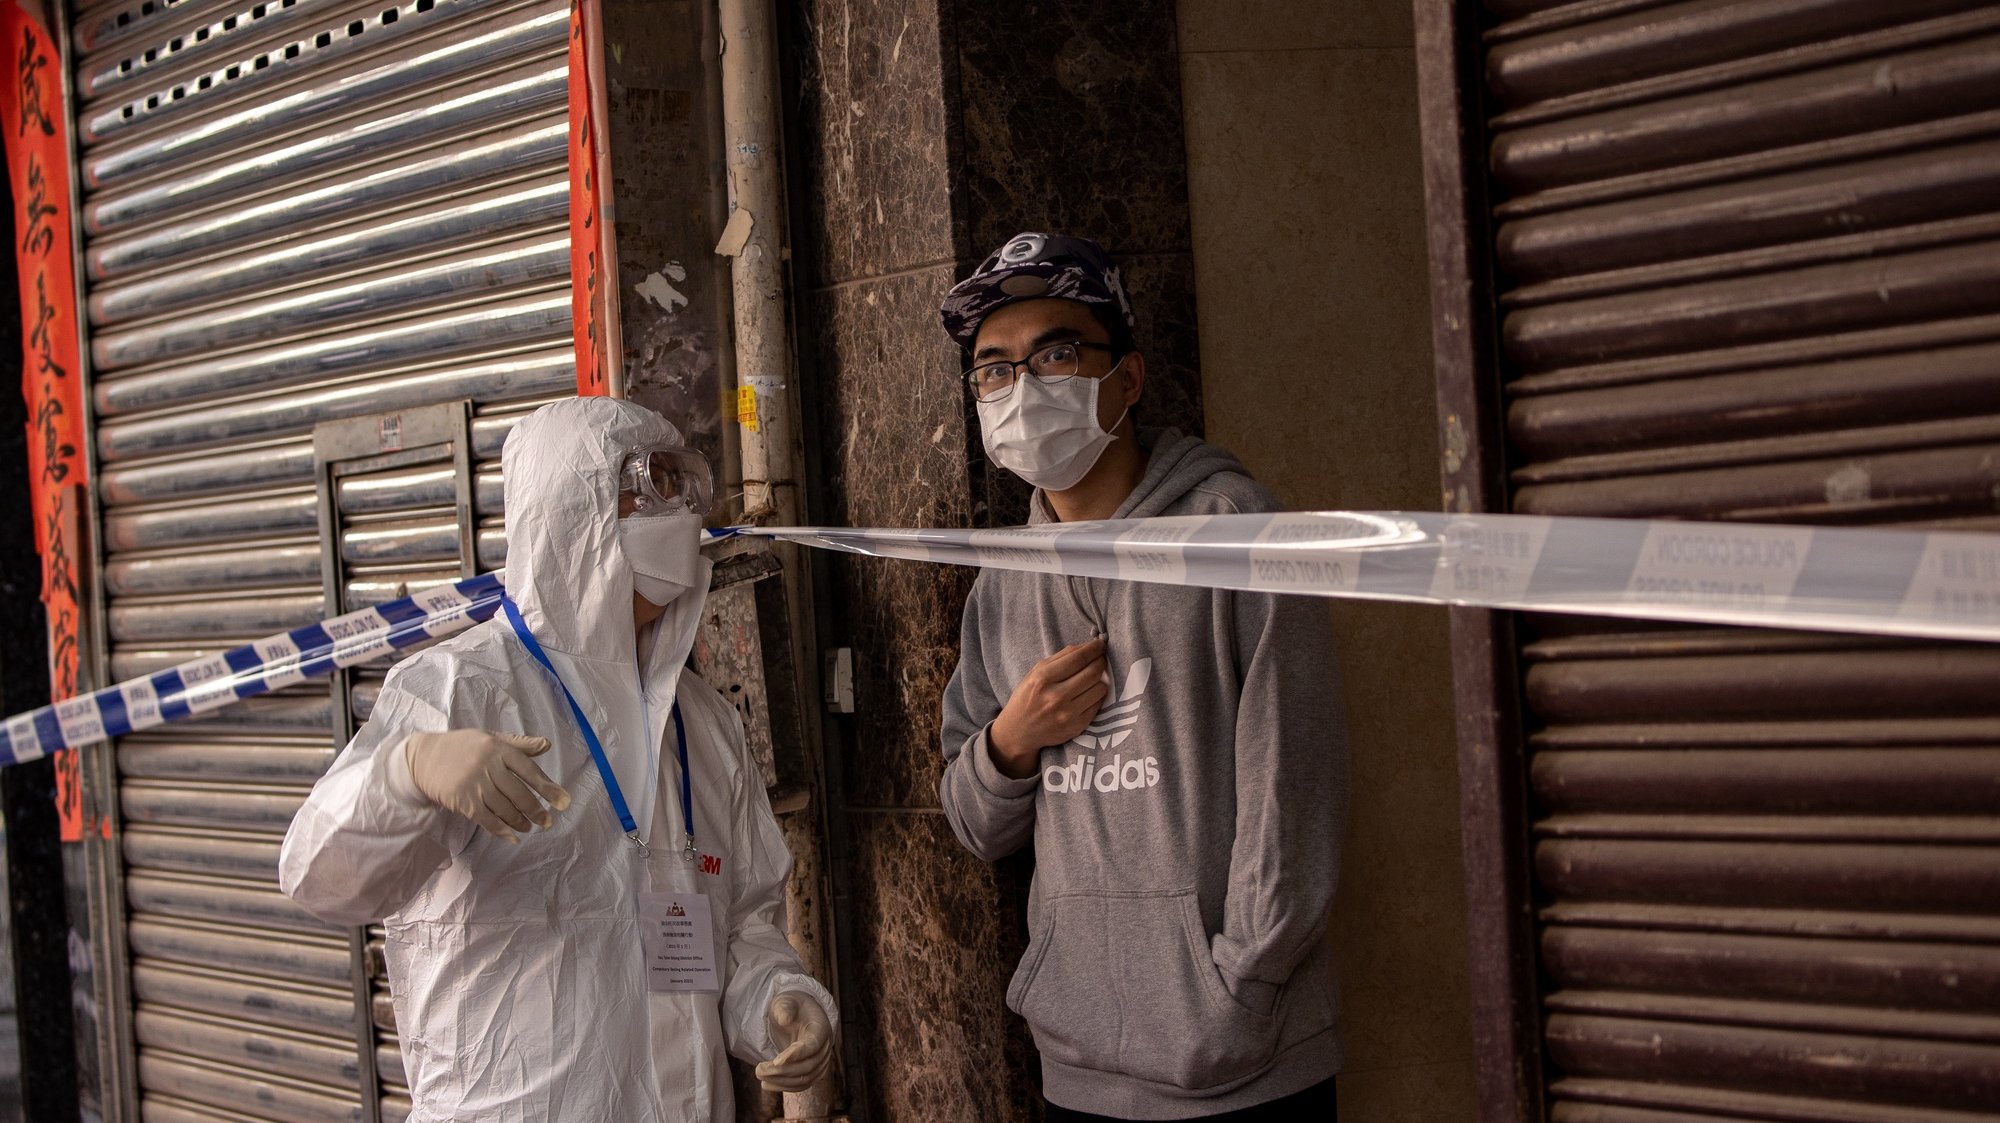 epa08959120 A local resident is forbidden to leave his building by a civil servant in face mask and protective gown during a lockdown in Jordan, Hong Kong, China, 23 January 2021. The Hong Kong government placed around 10,000 residents in an estimated 200 buildings of Jordan district under a 48-hours COVID-19 lockdown. People will not be allowed to leave until most of the testing for COVID-19 has been completed and they have a negative result.  EPA/JEROME FAVRE